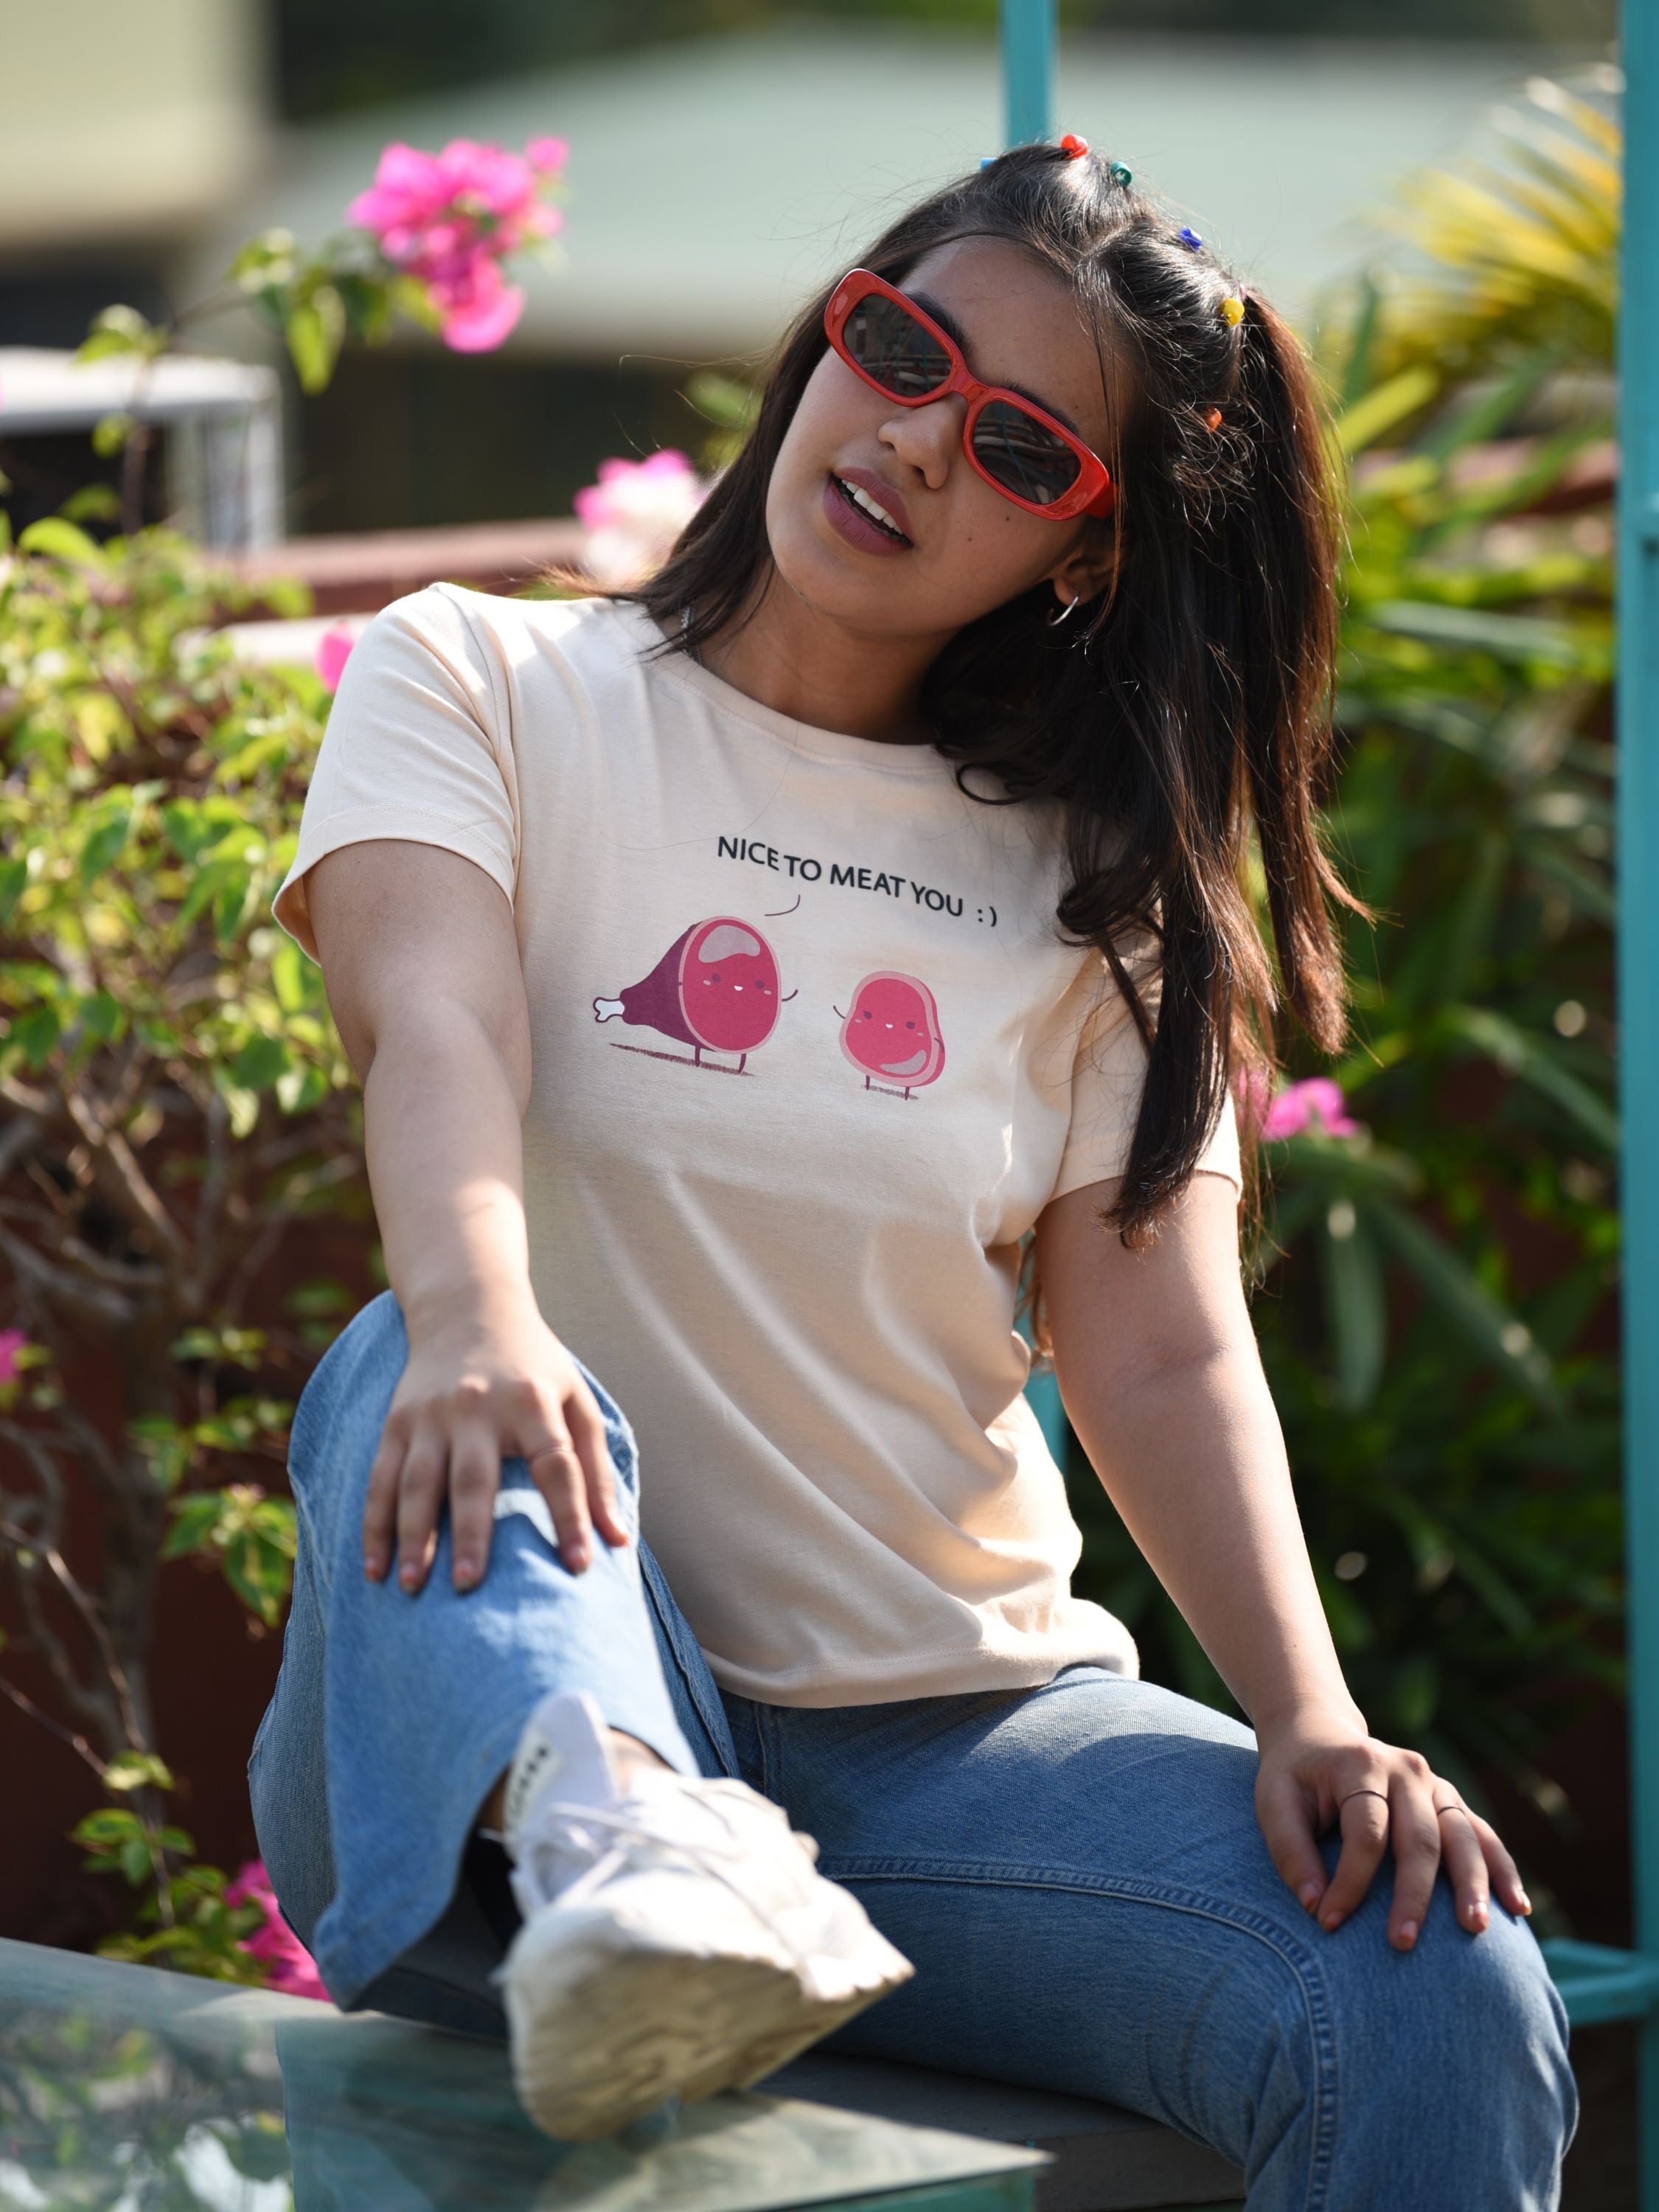 TeenTrums Girls  Graphic T-shirt nice - to meat you - Peach